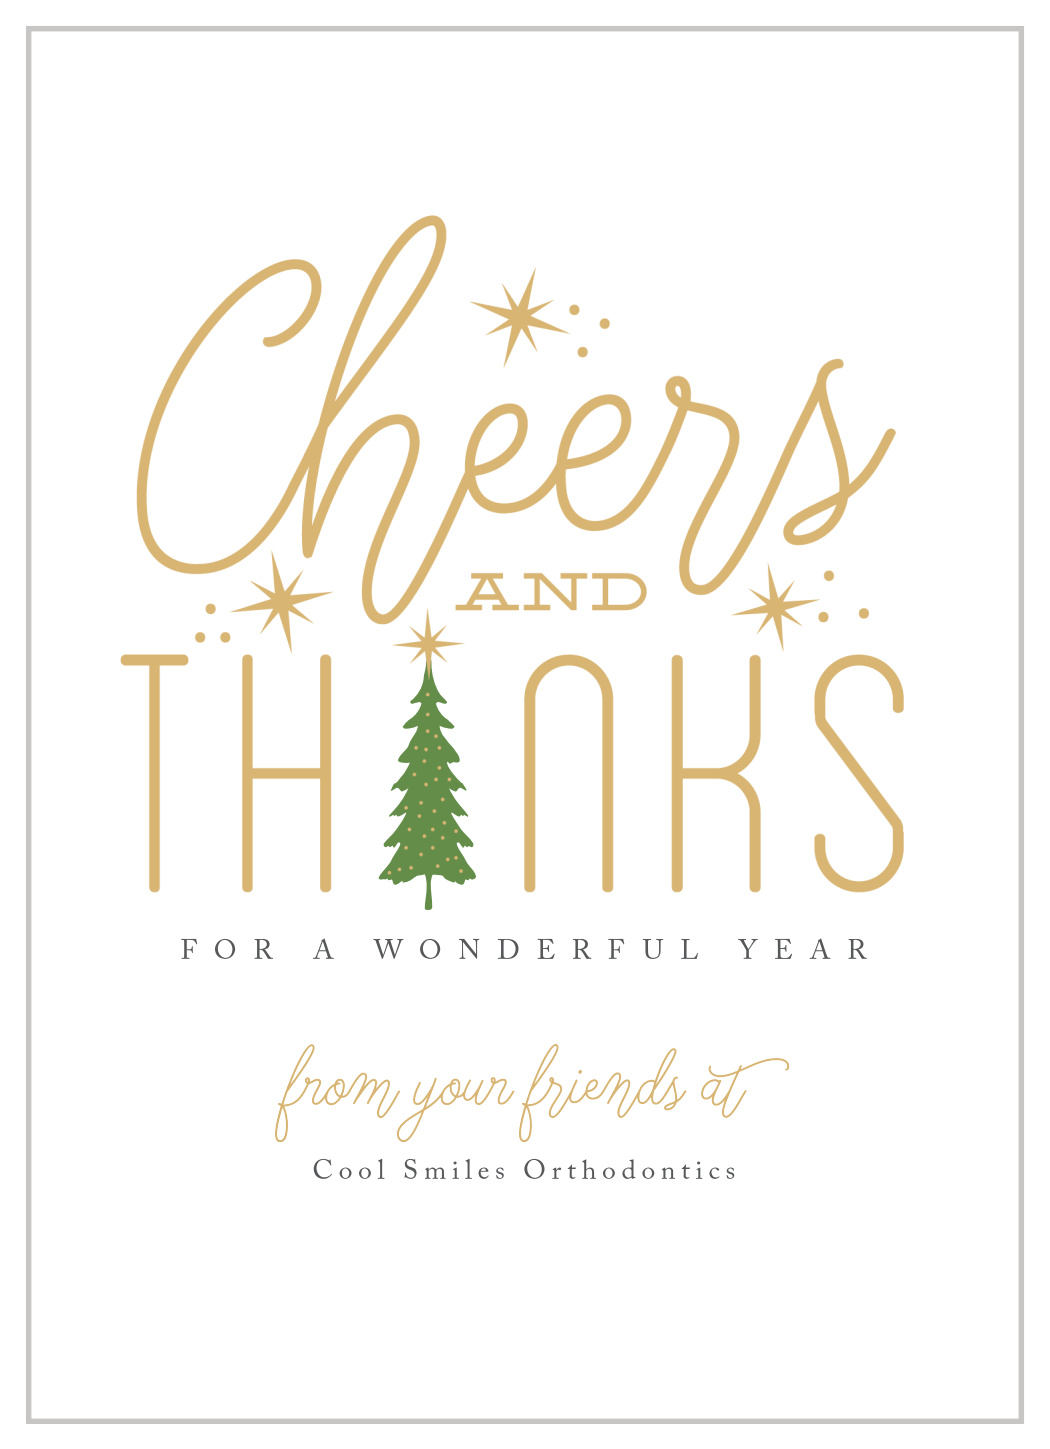 Cheers & Thanks Corporate Christmas Cards